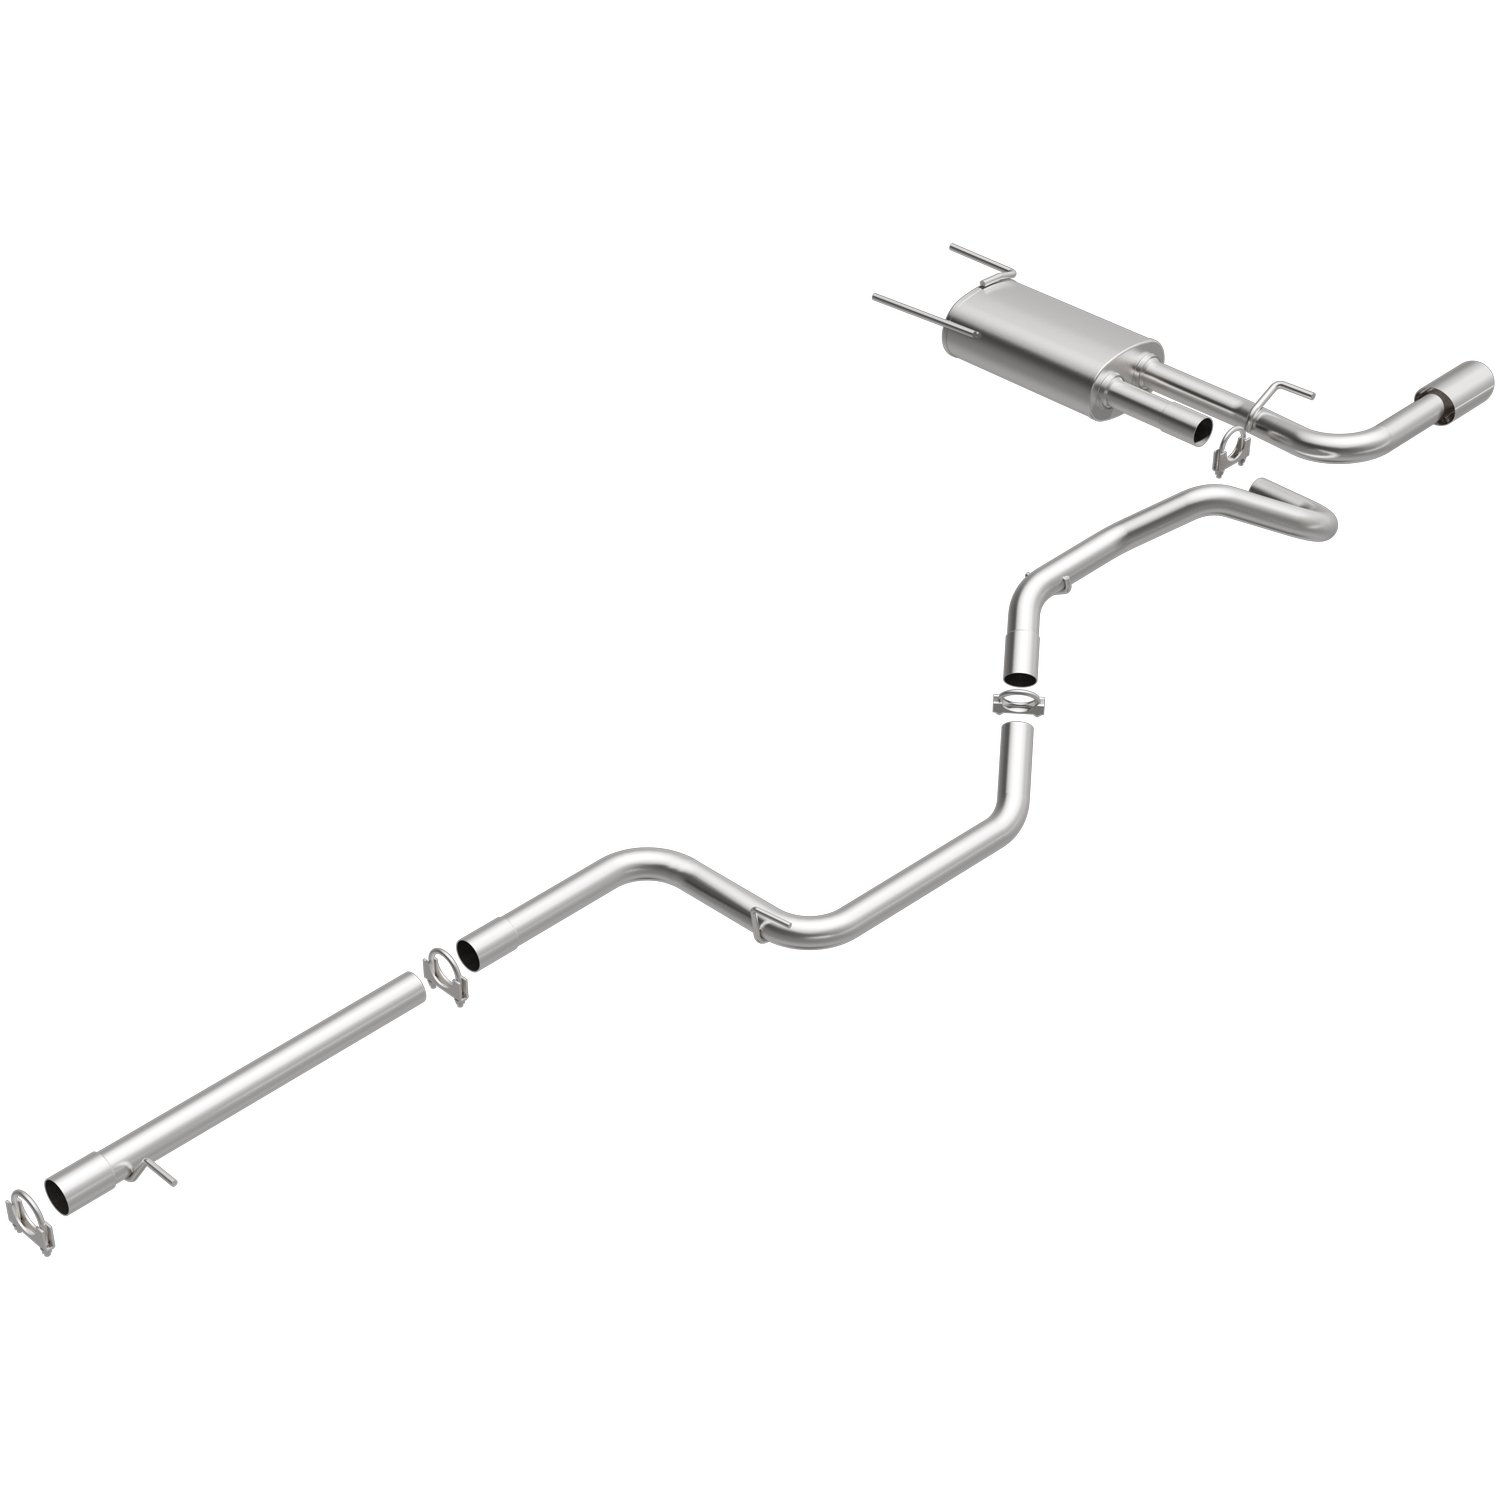 Direct-Fit Exhaust Kit, 2010-2013 Mazda 3